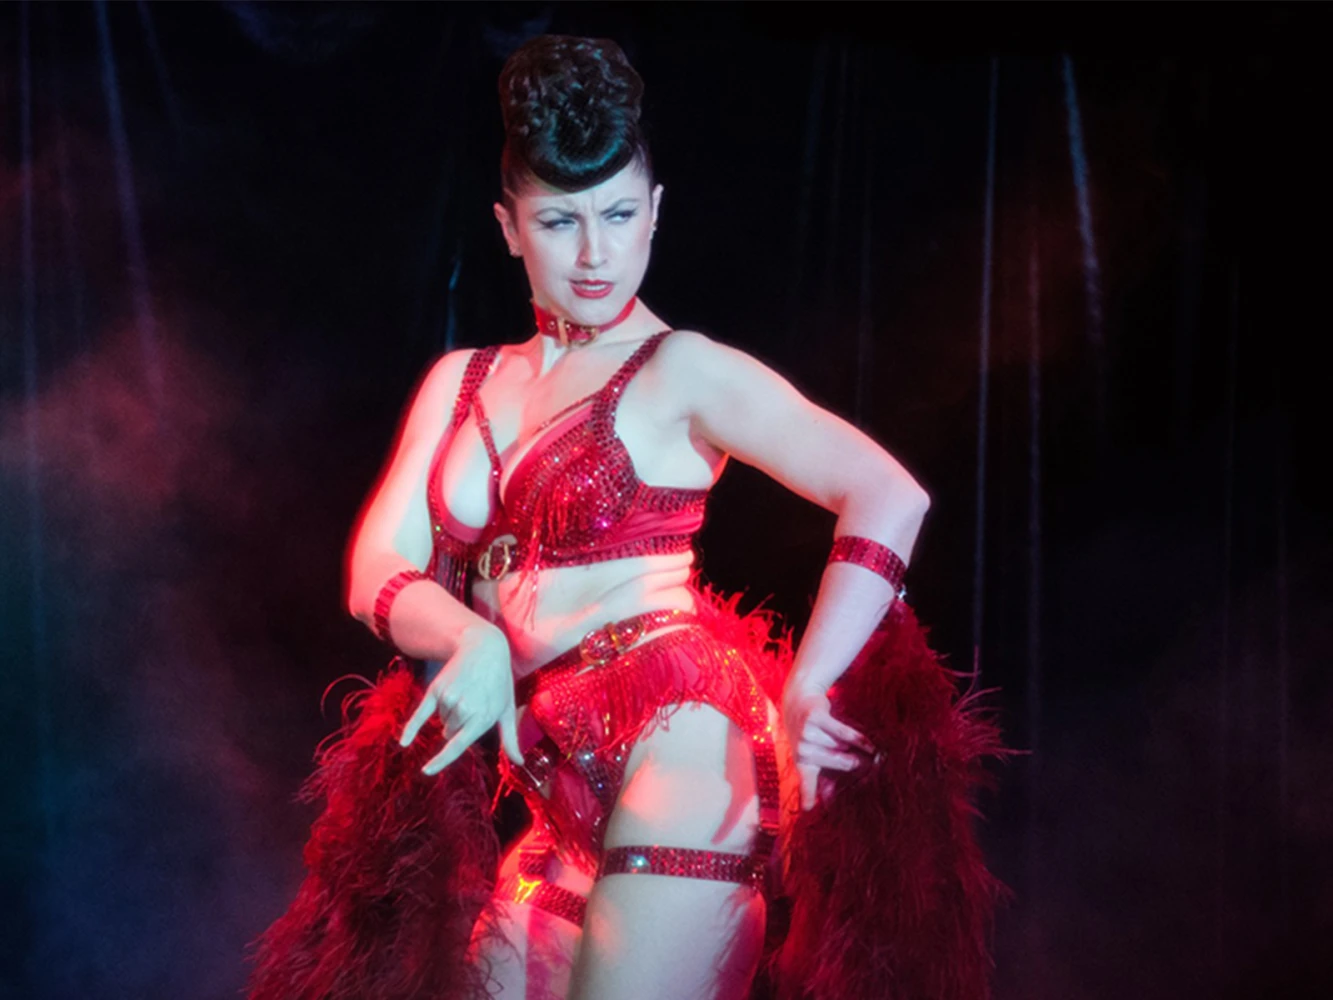 The Vaudeville Revue: What to expect - 1